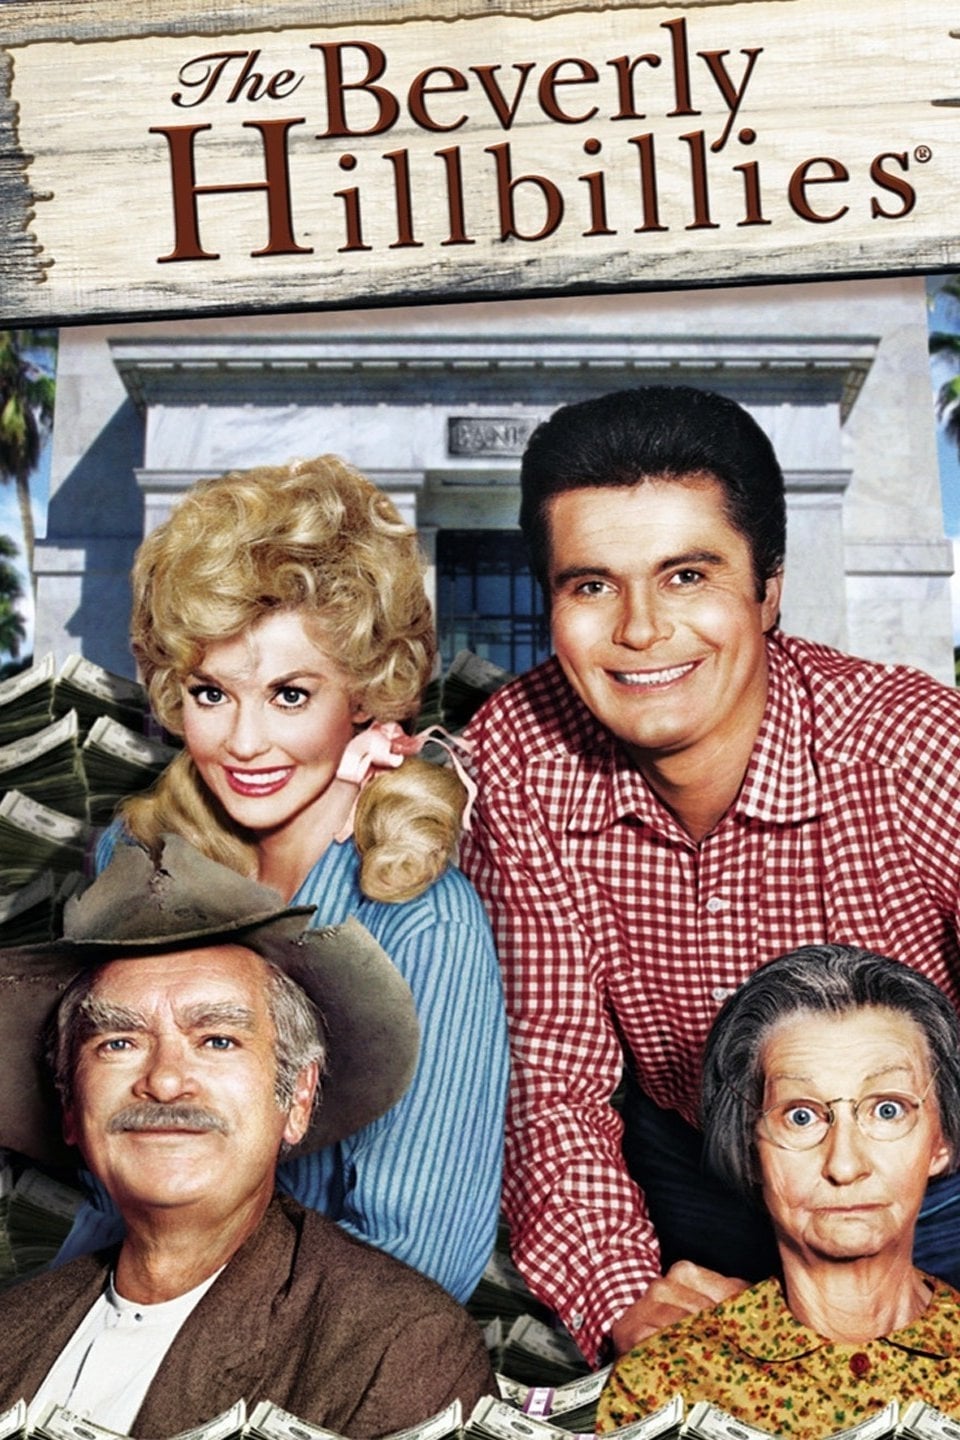 The Beverly Hillbillies Images. 